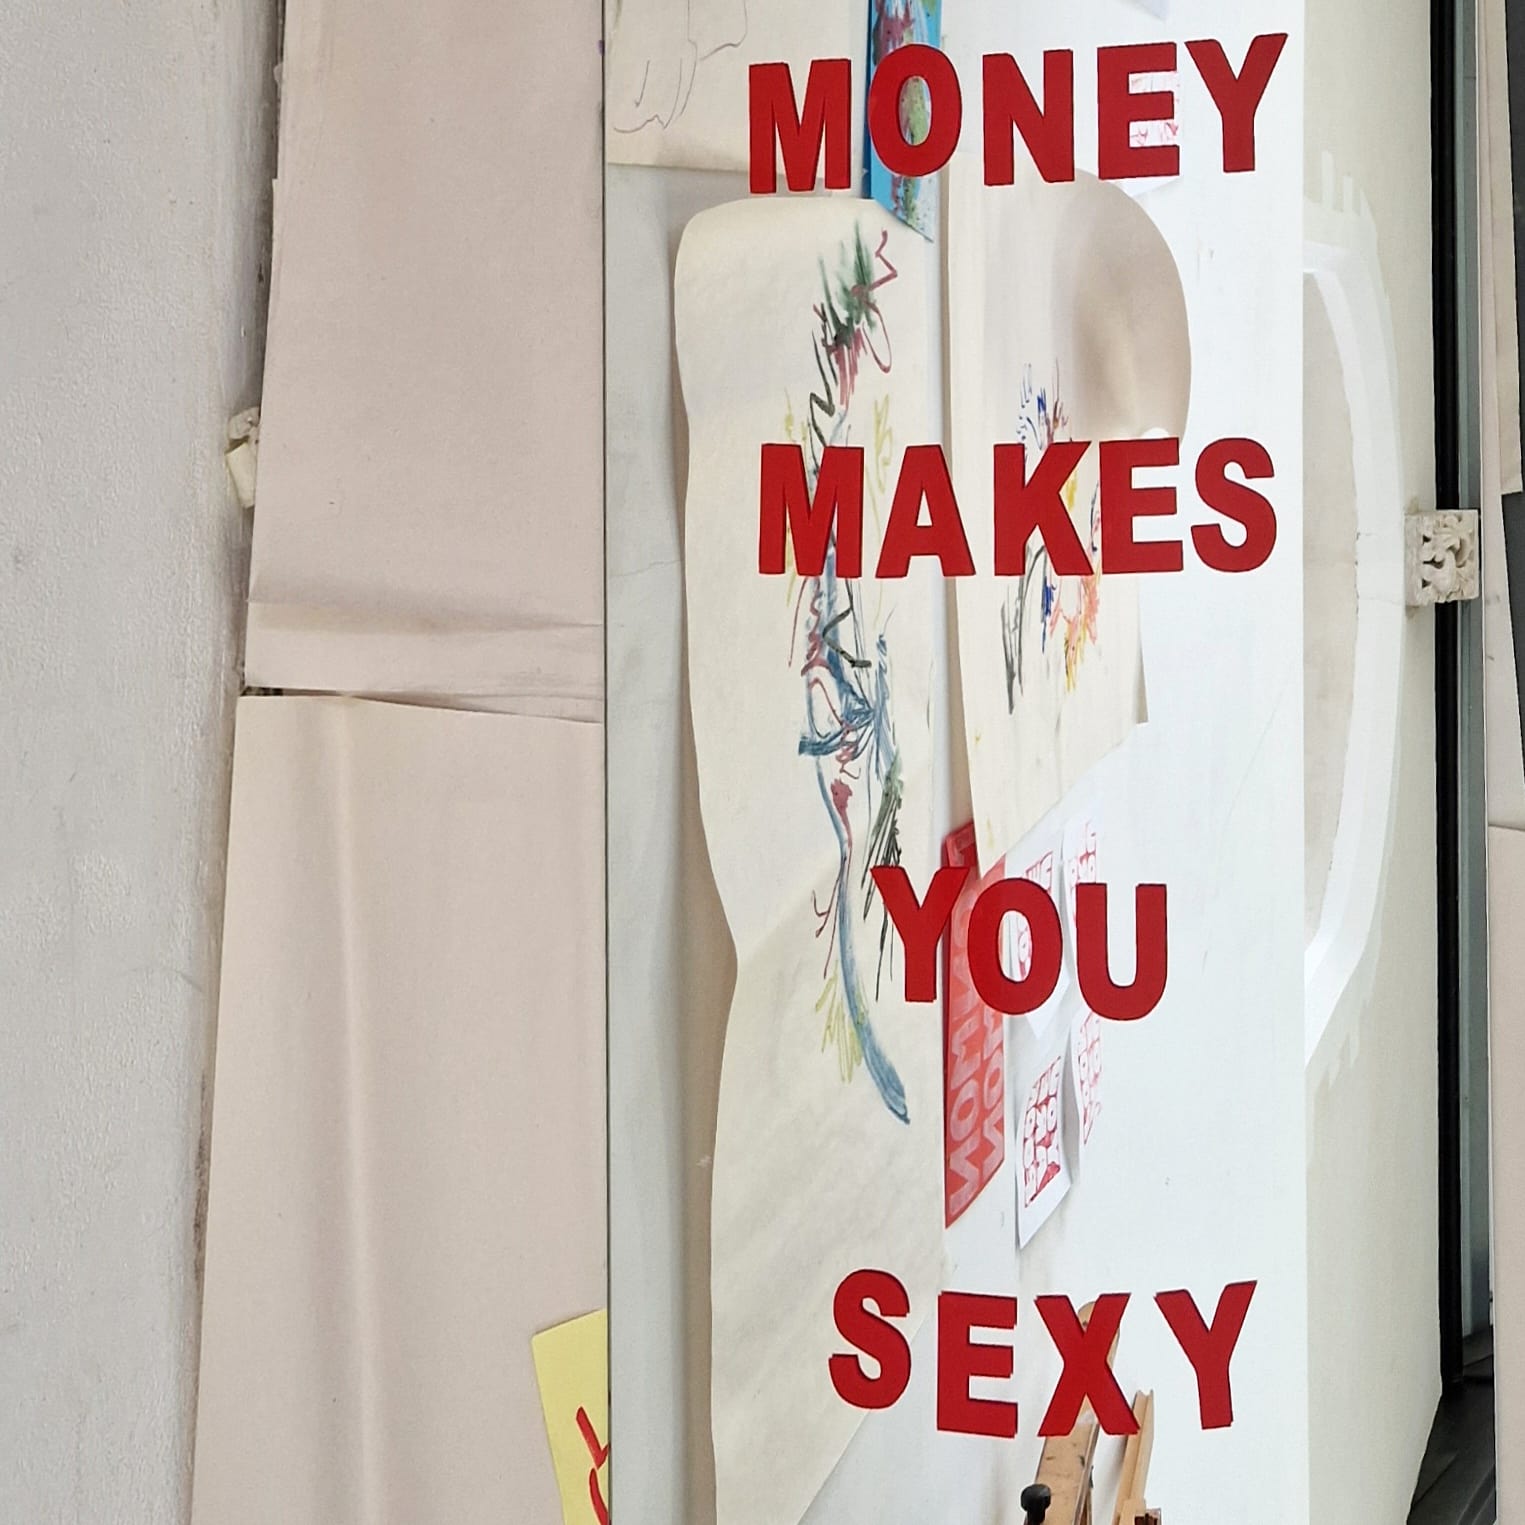 A collection of drawings mirrors and posters surrounding a room, one mirror says having money makes you sexy. 